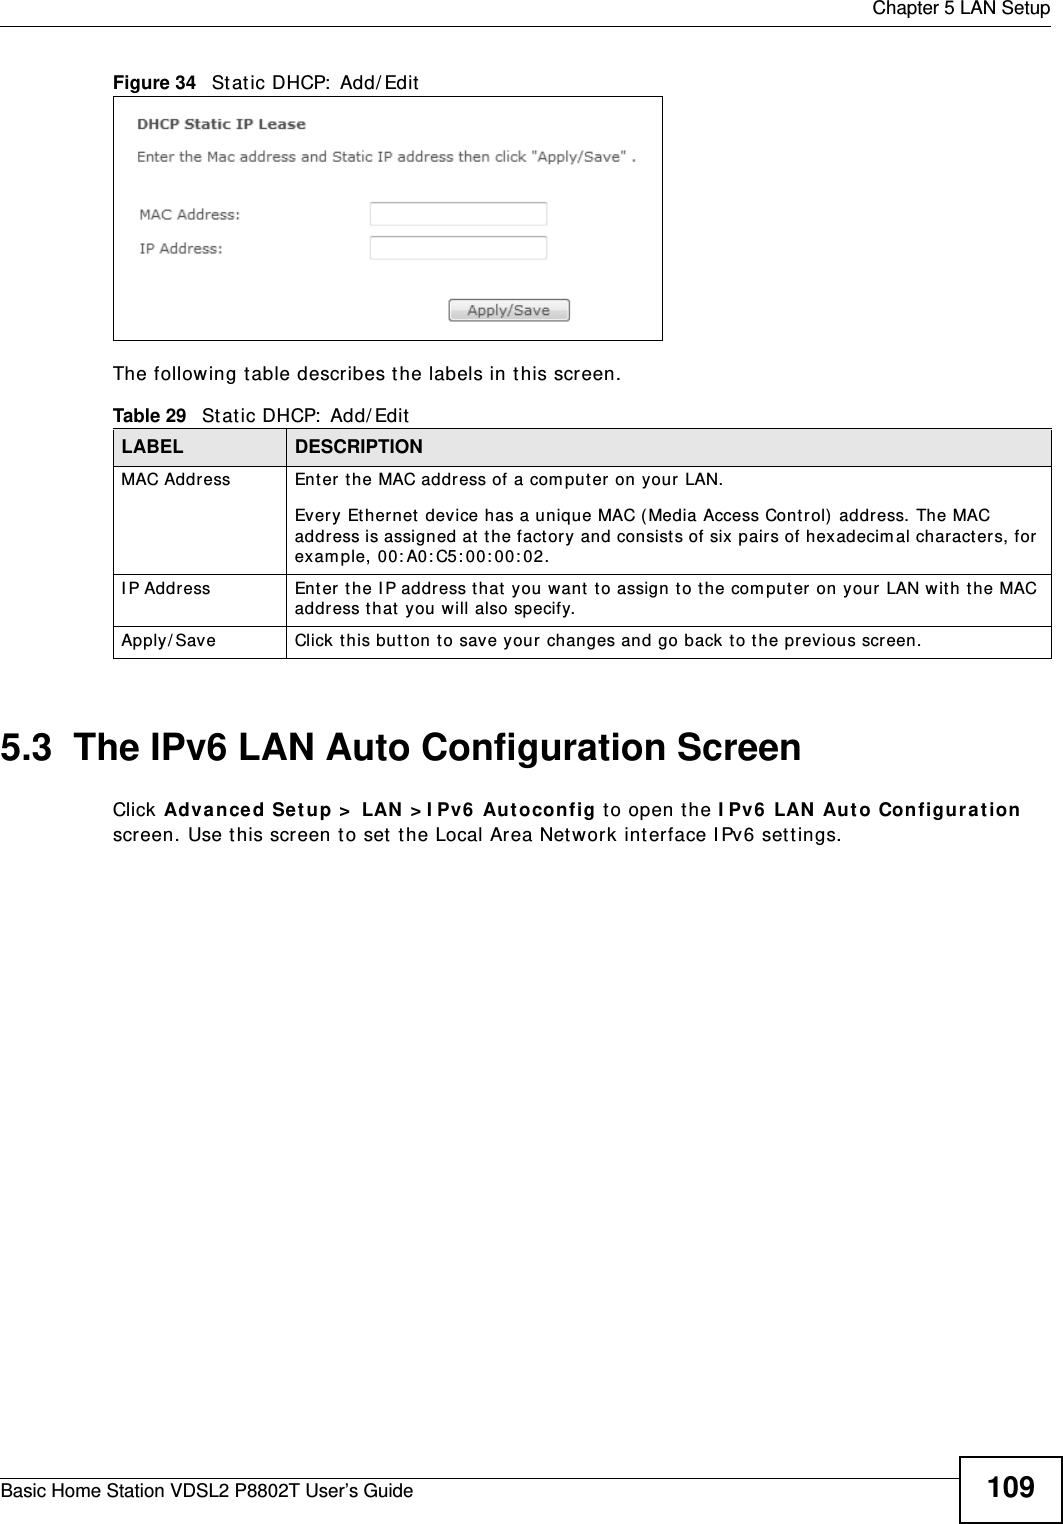  Chapter 5 LAN SetupBasic Home Station VDSL2 P8802T User’s Guide 109Figure 34   Stat ic DHCP:  Add/ EditThe following t able describes t he labels in t his screen.5.3  The IPv6 LAN Auto Configuration ScreenClick Advanced Se t up &gt;  LAN &gt; I Pv6  Autoconfig to open the I Pv6  LAN Aut o Con figurat ion screen. Use t his screen to set  the Local Area Network int erface I Pv6 set t ings. Table 29   St at ic DHCP:  Add/ EditLABEL DESCRIPTIONMAC Address Enter t he MAC address of a com puter on your LAN.Every Ethernet device has a unique MAC (Media Access Cont rol)  address. The MAC address is assigned at t he fact ory and consist s of six  pairs of hexadecim al charact ers, for exam ple, 00: A0: C5: 00: 00: 02.I P Address Enter t he I P address t hat  you want to assign t o the com puter on your LAN wit h t he MAC address t hat  you w ill also specify.Apply/ Save Click t his butt on to save your changes and go back t o the previous screen.